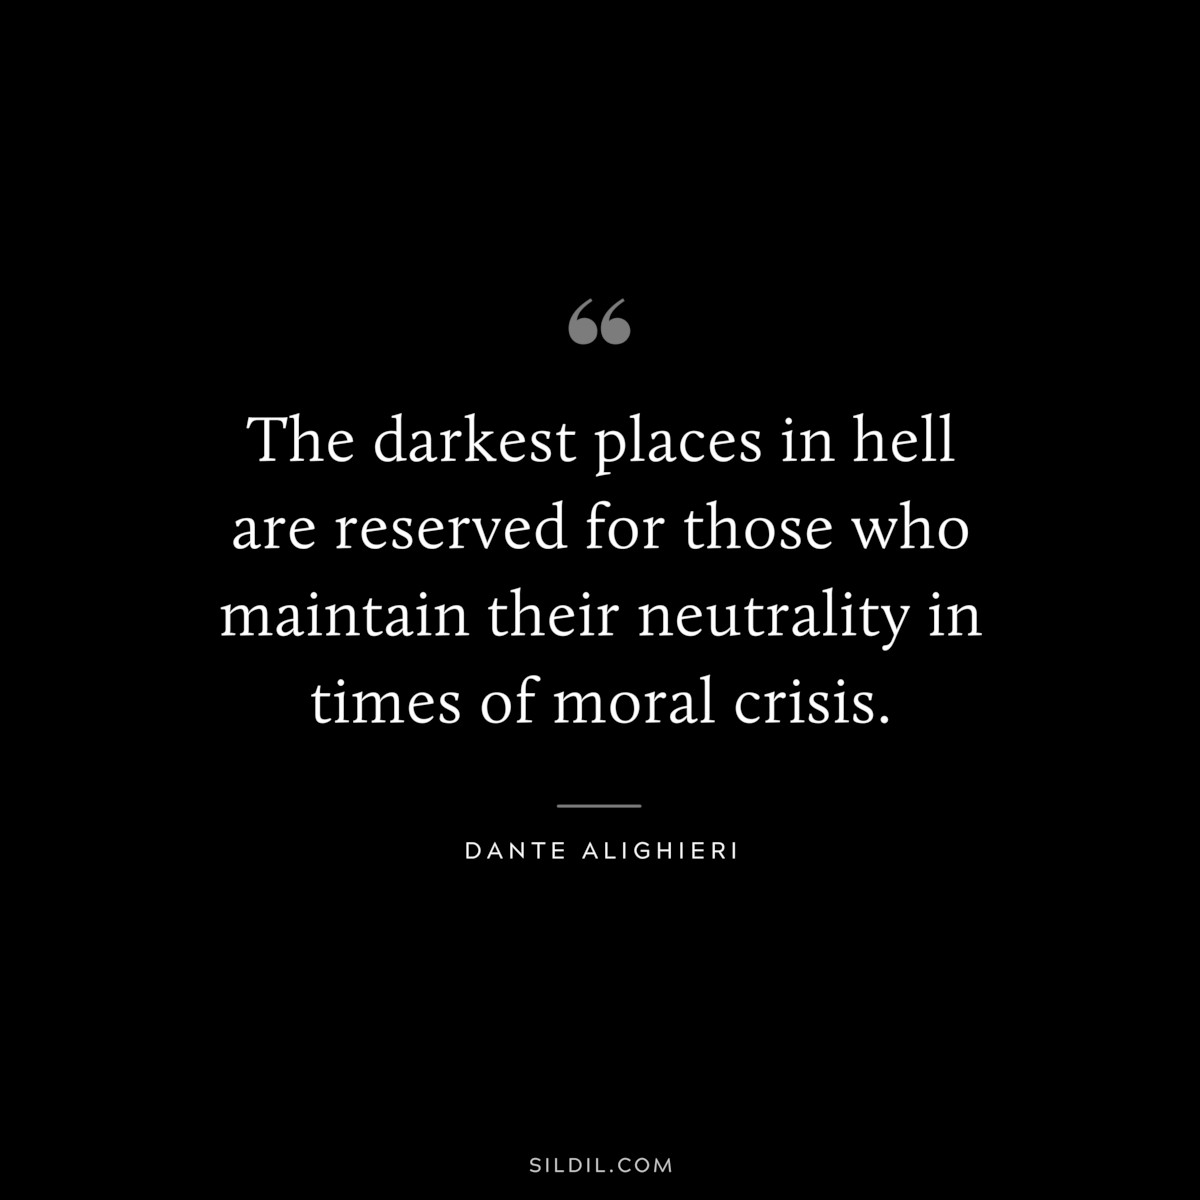 The darkest places in hell are reserved for those who maintain their neutrality in times of moral crisis. ― Dante Alighieri